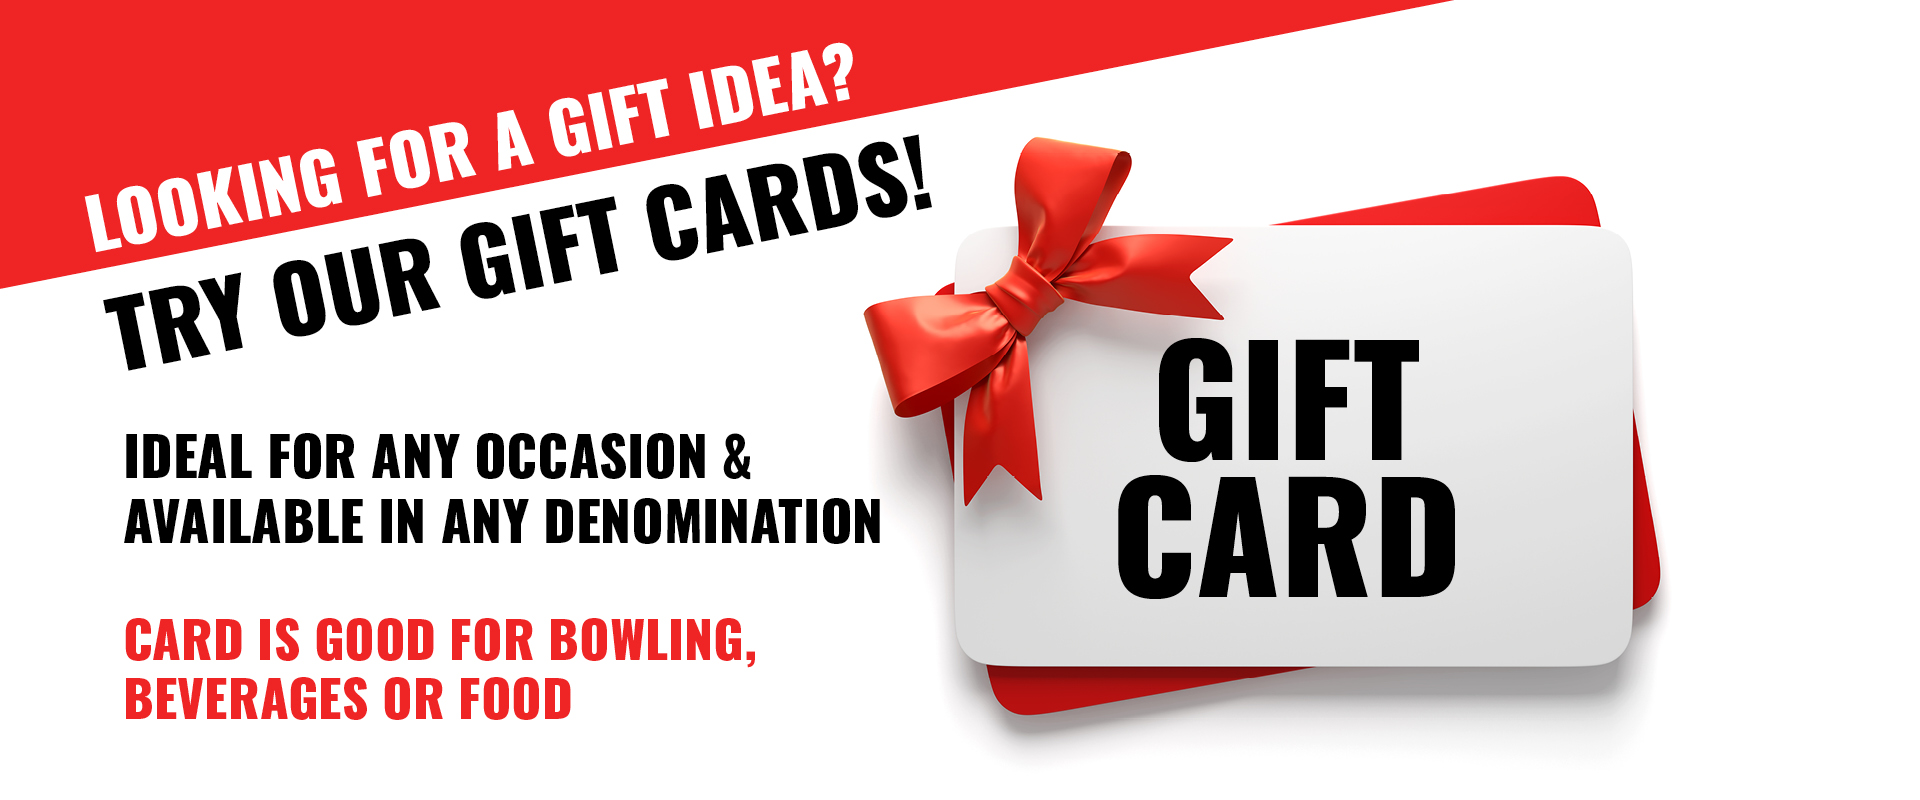 Try Our Gift Cards